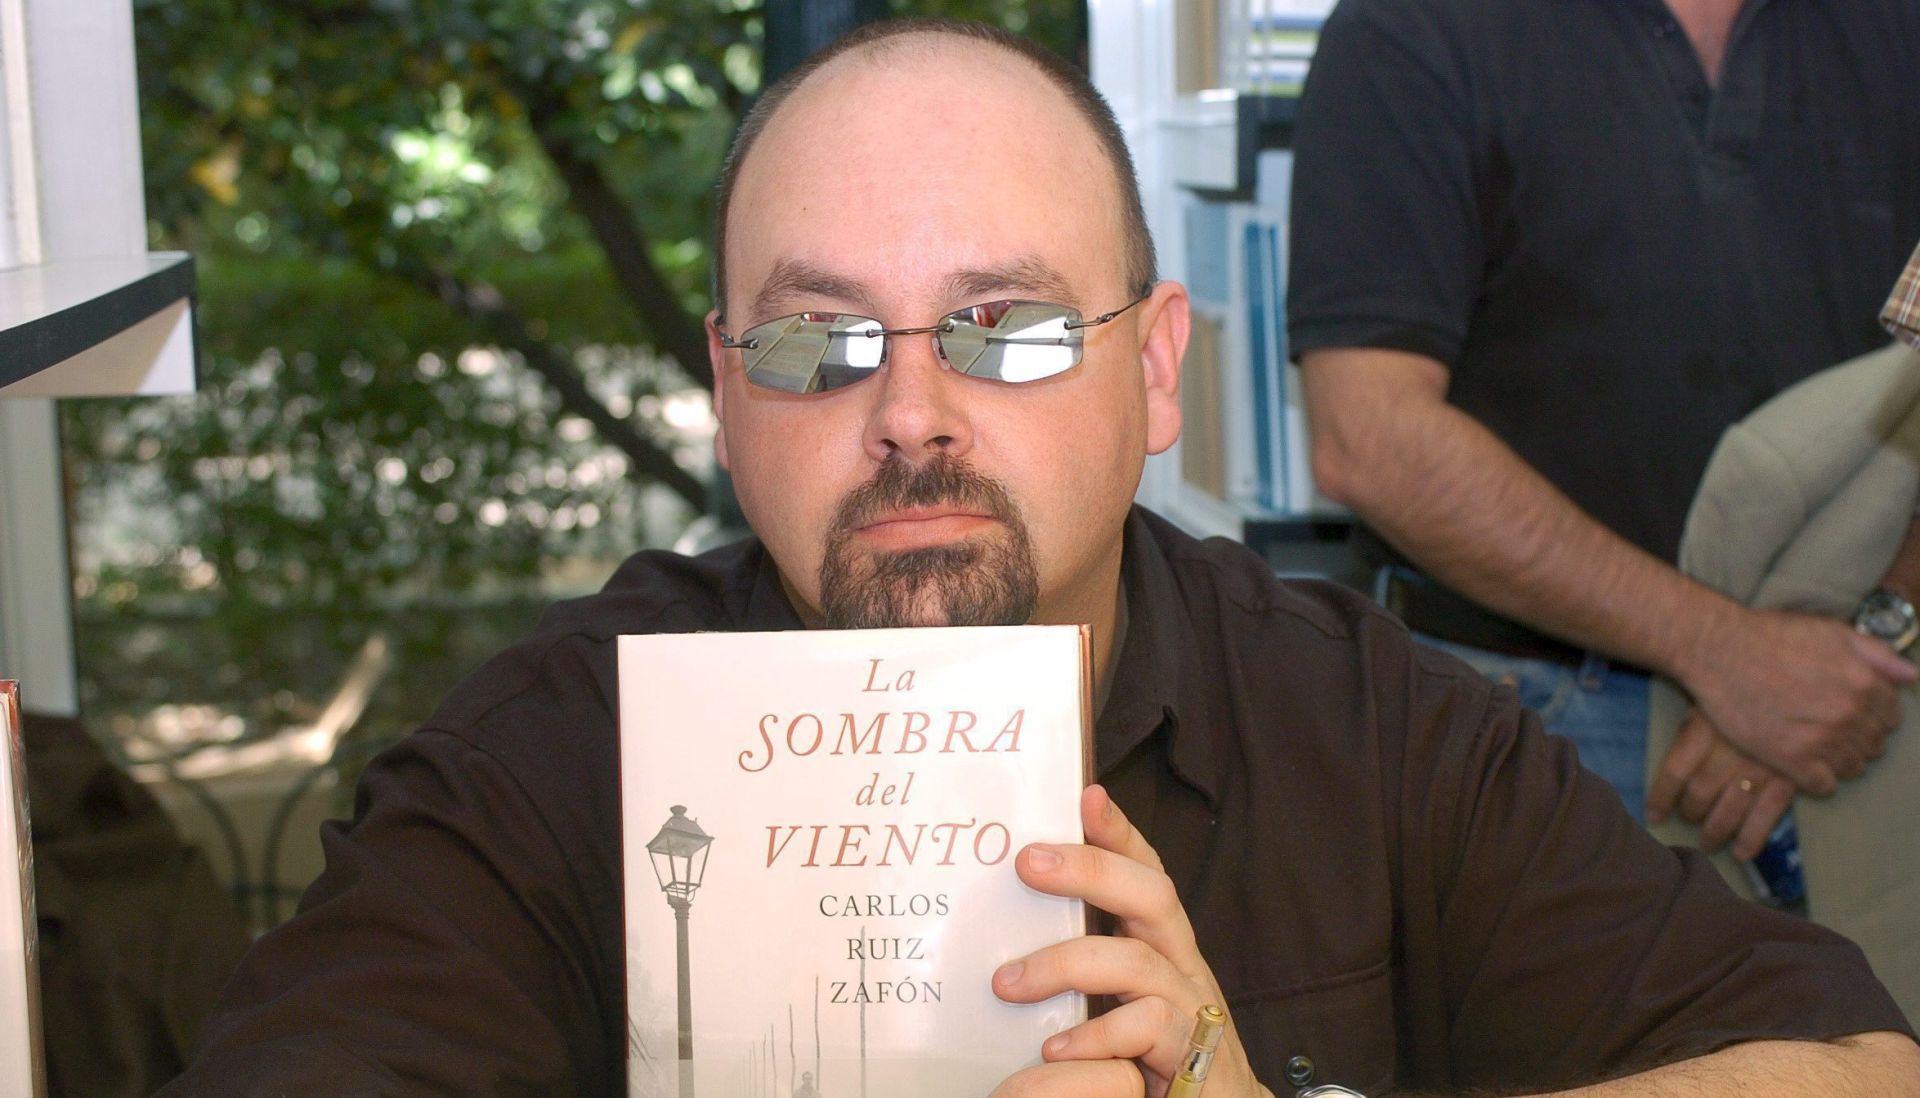 epa08495283 (FILE) - Spanish author Carlos Ruiz Zafon poses for a photograph while holding up a copy of his bestselling novel during a book-signing event at the Madrid Book Fair in Madrid, Spain, 28 May 2005 (reissued 19 June 2020). Zafon passed away at the age of 55 in Los Angeles, USA, after a long struggle against colon cancer, according to a press release by the publishing house Planeta, which worked extensively with the Spanish novelist over two decades of prolific partnership. The author of bestsellers such as 'The Shadow of the Wind' (2001) and 'The Labyrinth of Spirits' (2016) had been a resident of LA since 1993. Born in Barcelona in 1964, Zafon got by as a publicist and screenwriter before earning literary fame and critical acclaim for 'The Shadow of the Wind,' a Gothic-style mystery page-turner that has sold dozens of millions of copies worldwide, making it one of the most successful fiction books of all time in terms of sales.  EPA/VICTOR LERENA *** Local Caption *** 53318763